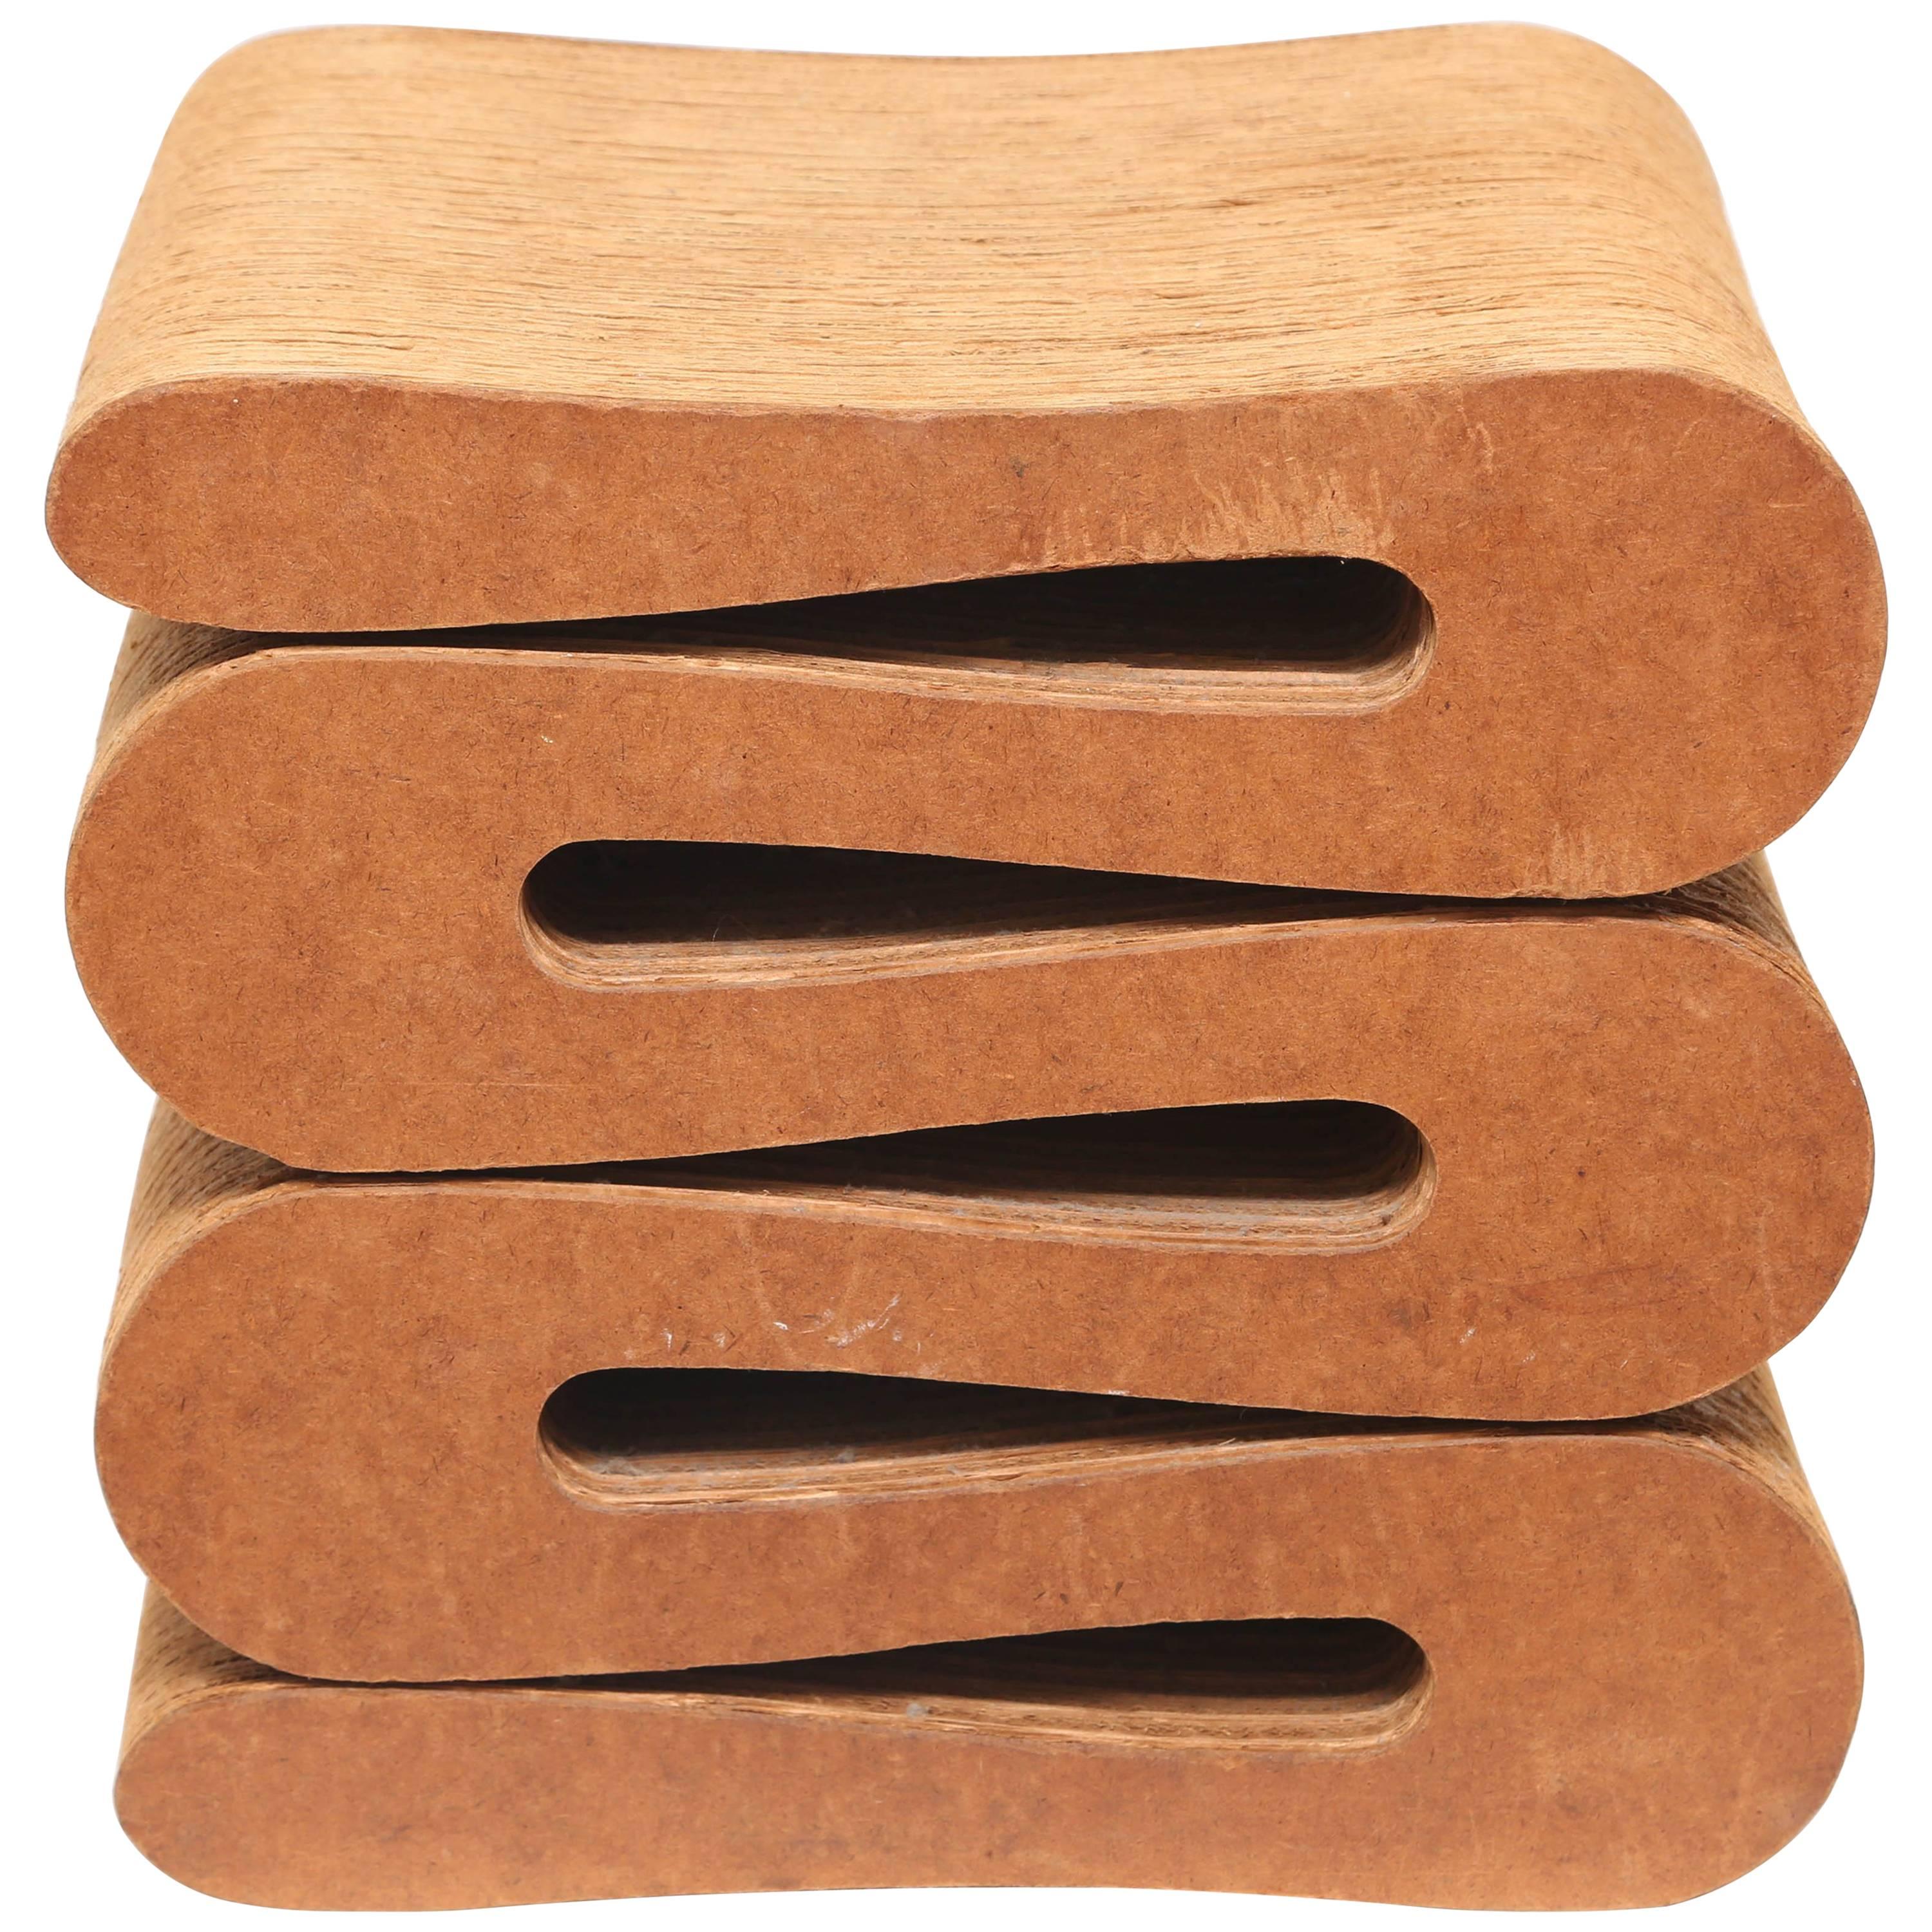 Vintage Frank Gehry "Wiggle Stool"